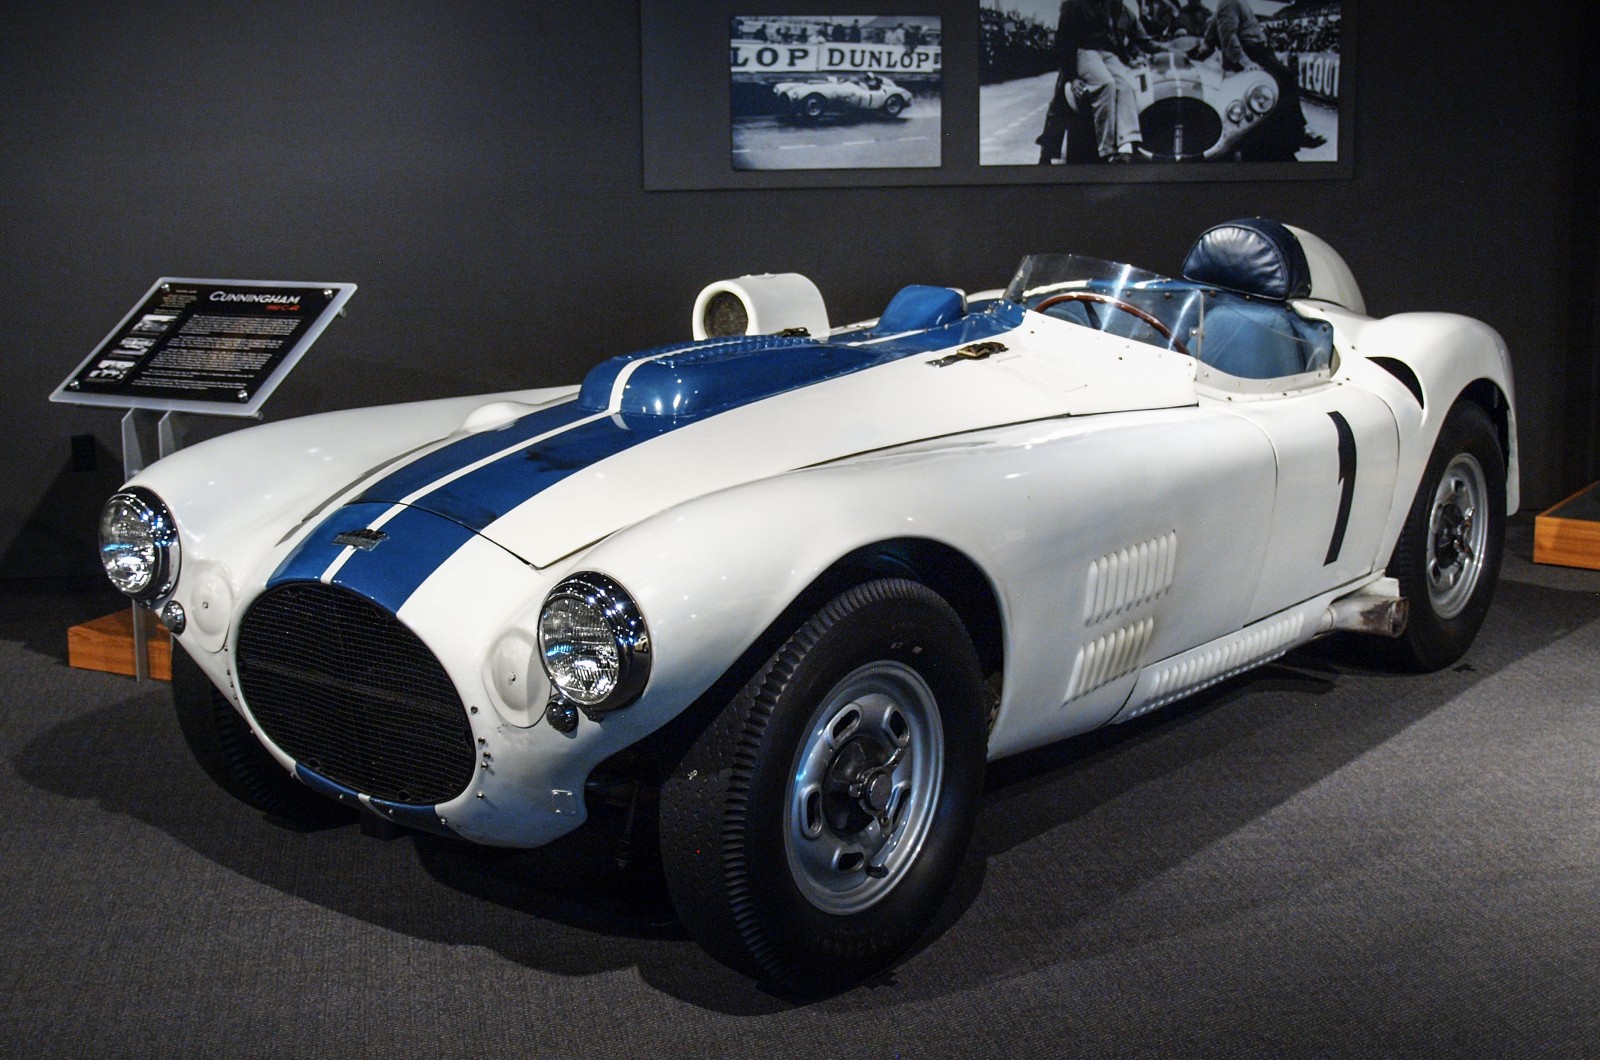 <p>Mercedes-Benz engineer<strong> Rudolf Uhlenhaut </strong>once called it the “safest handling race car.” Developed in 1952 for the Briggs Cunningham racing team, the C-4R is renowned for its impressive track record. </p><p>The C-4R notched up 12 victories and 26 podium finishes, won the 12-hour race at Sebring in 1953, and secured third place finishes at the 1952 12 Hours of Reims and 1954 24 Hours of Le Mans. The car won 74% of all events it entered and finished 84% of the races it started, setting a high benchmark for American sports car performance.</p>